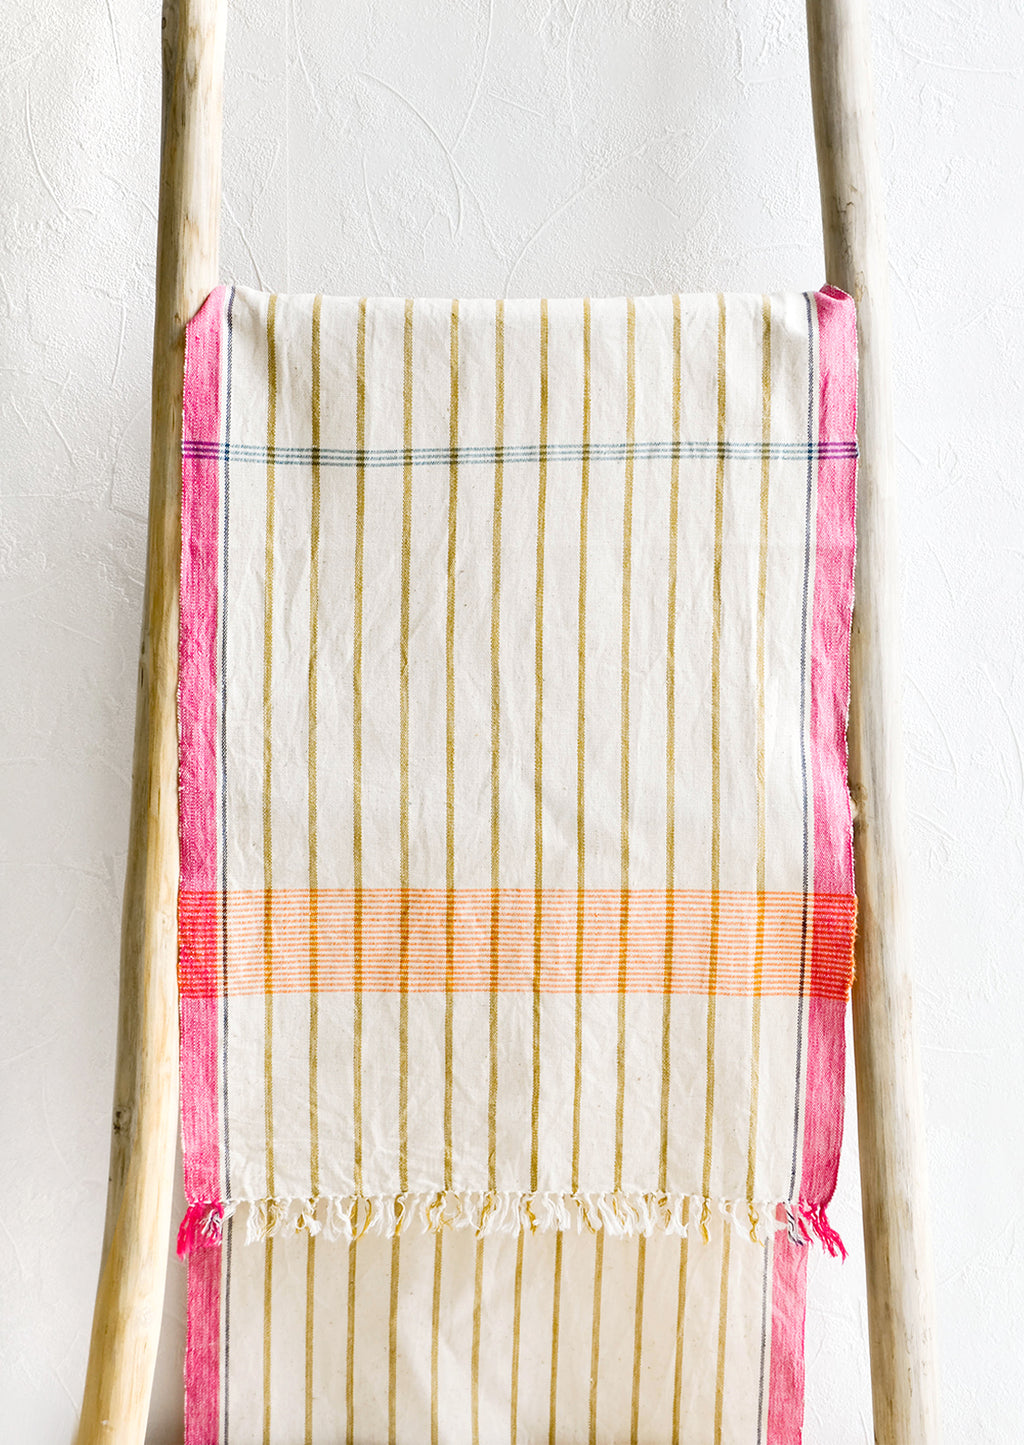 2: Brightly colored cotton table runner displayed on wooden ladder